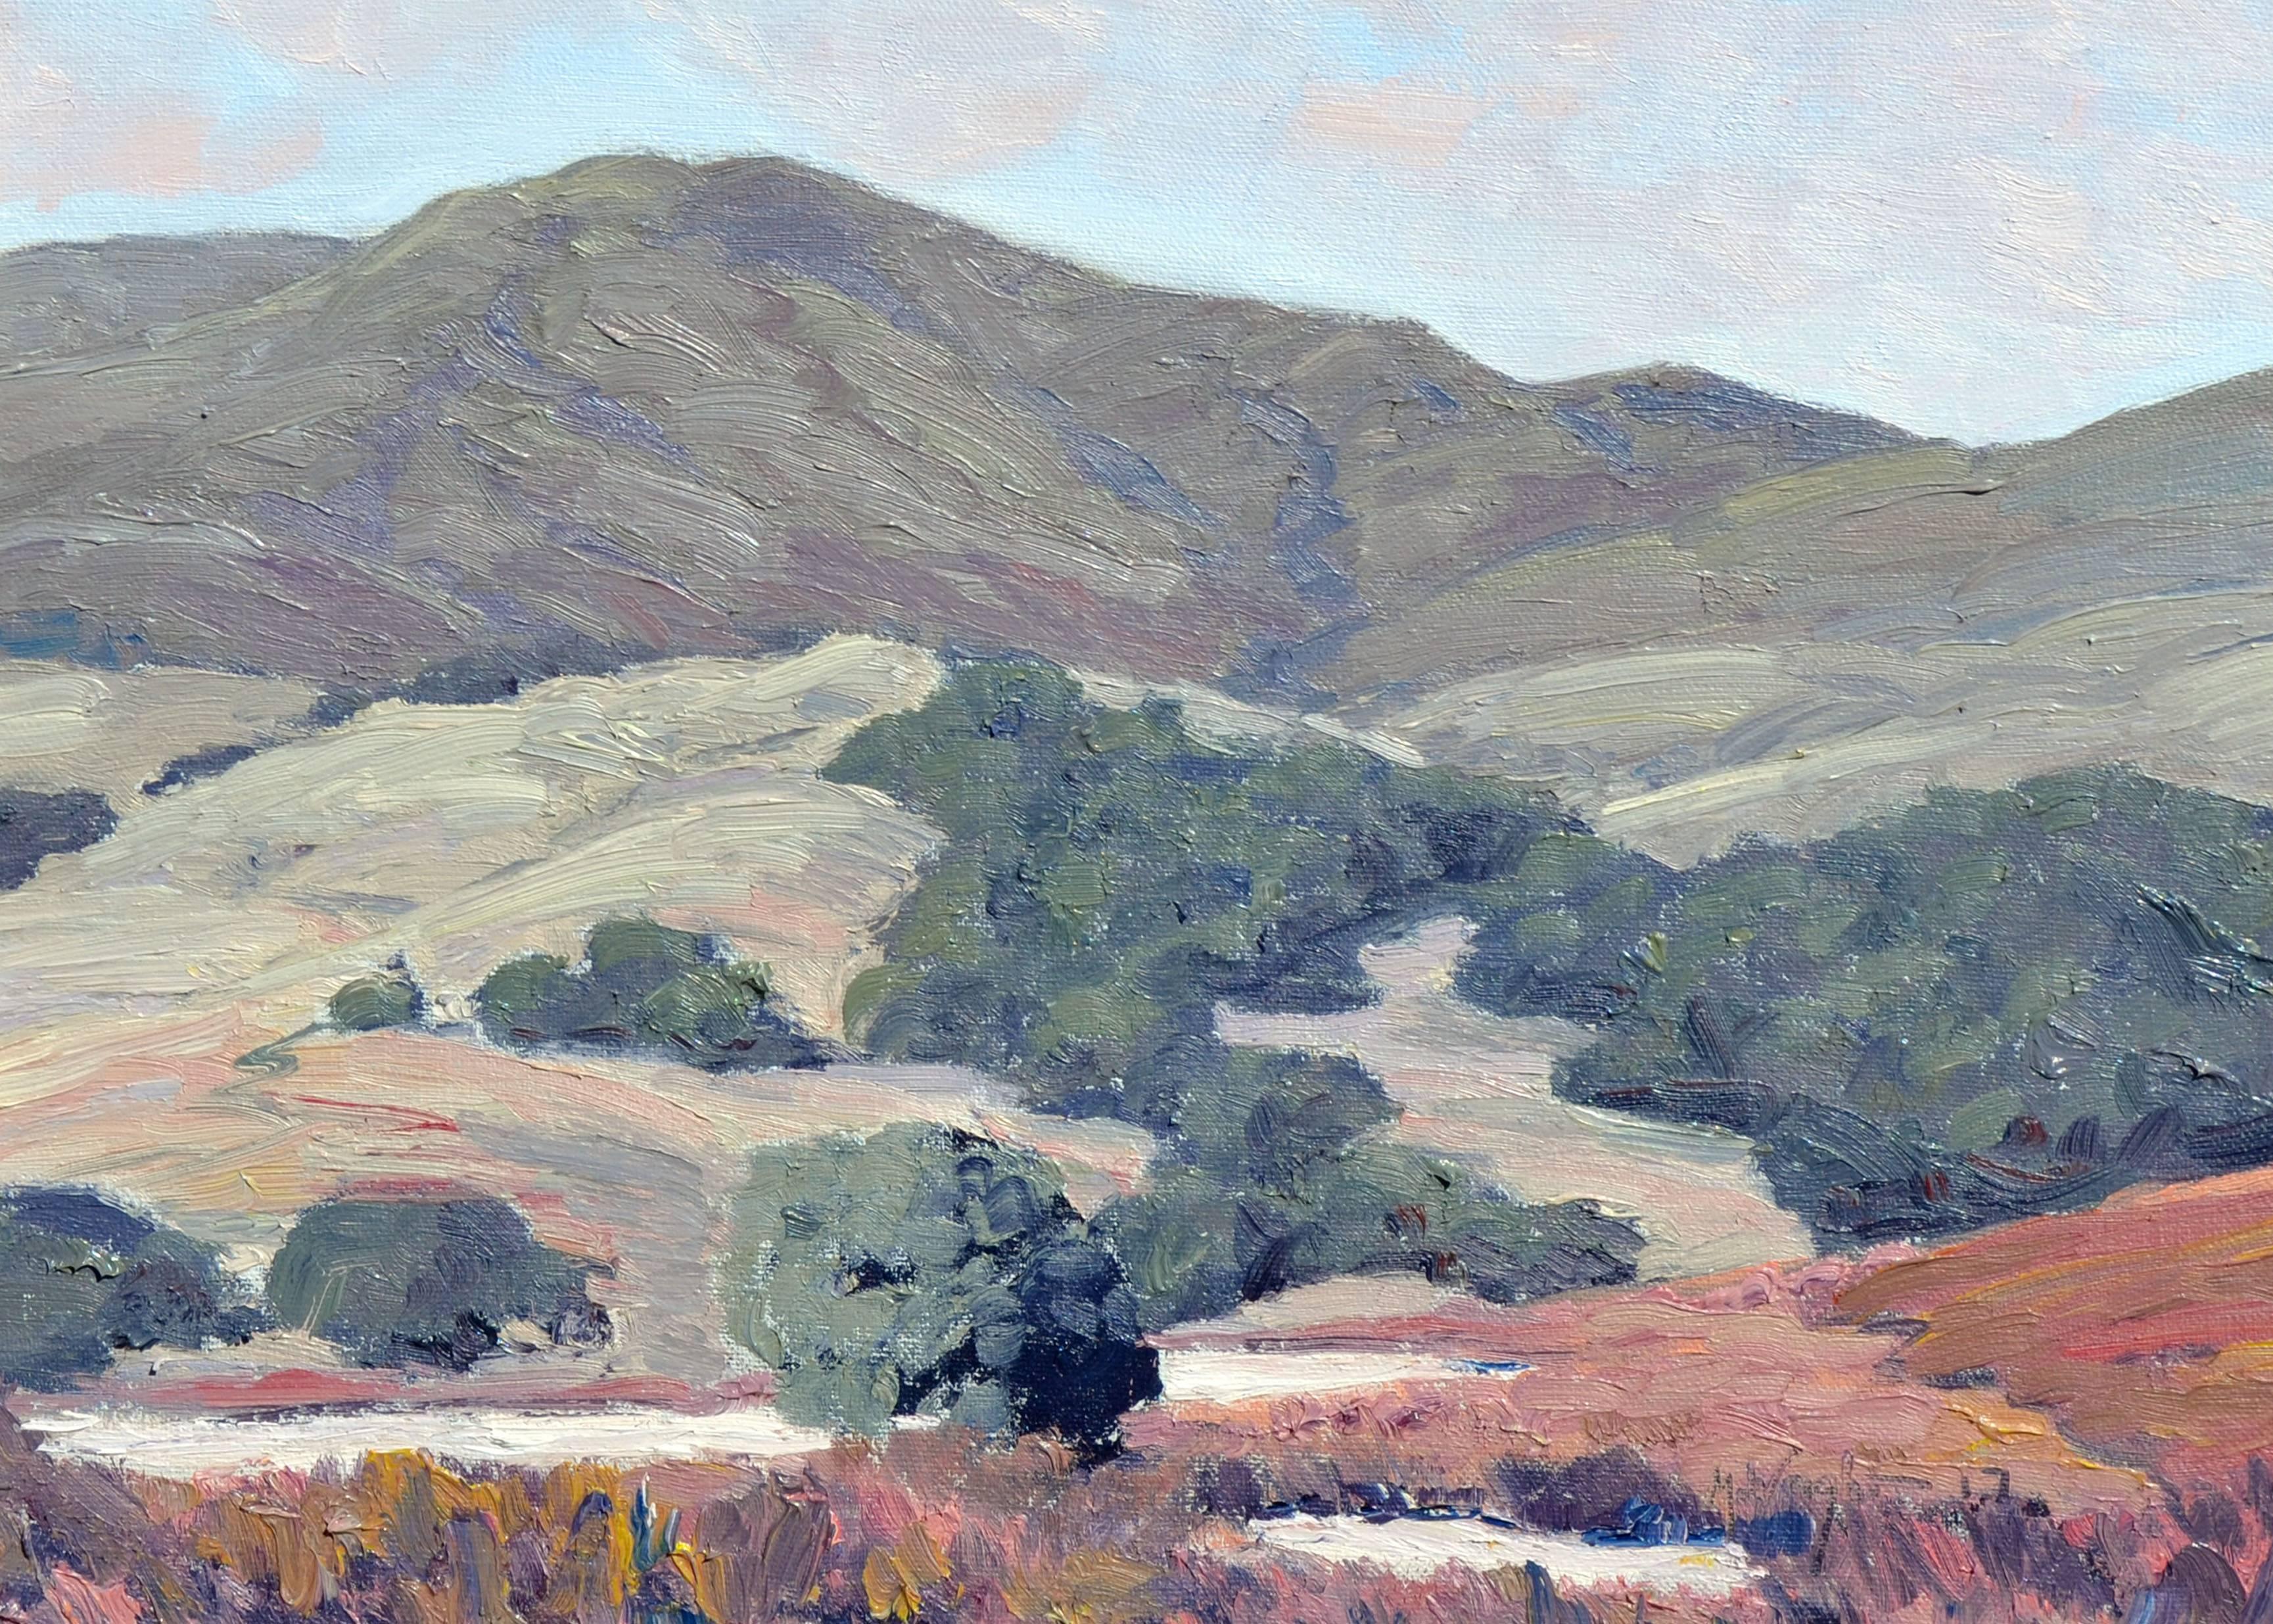 California Hills - Painting by Michael Wright